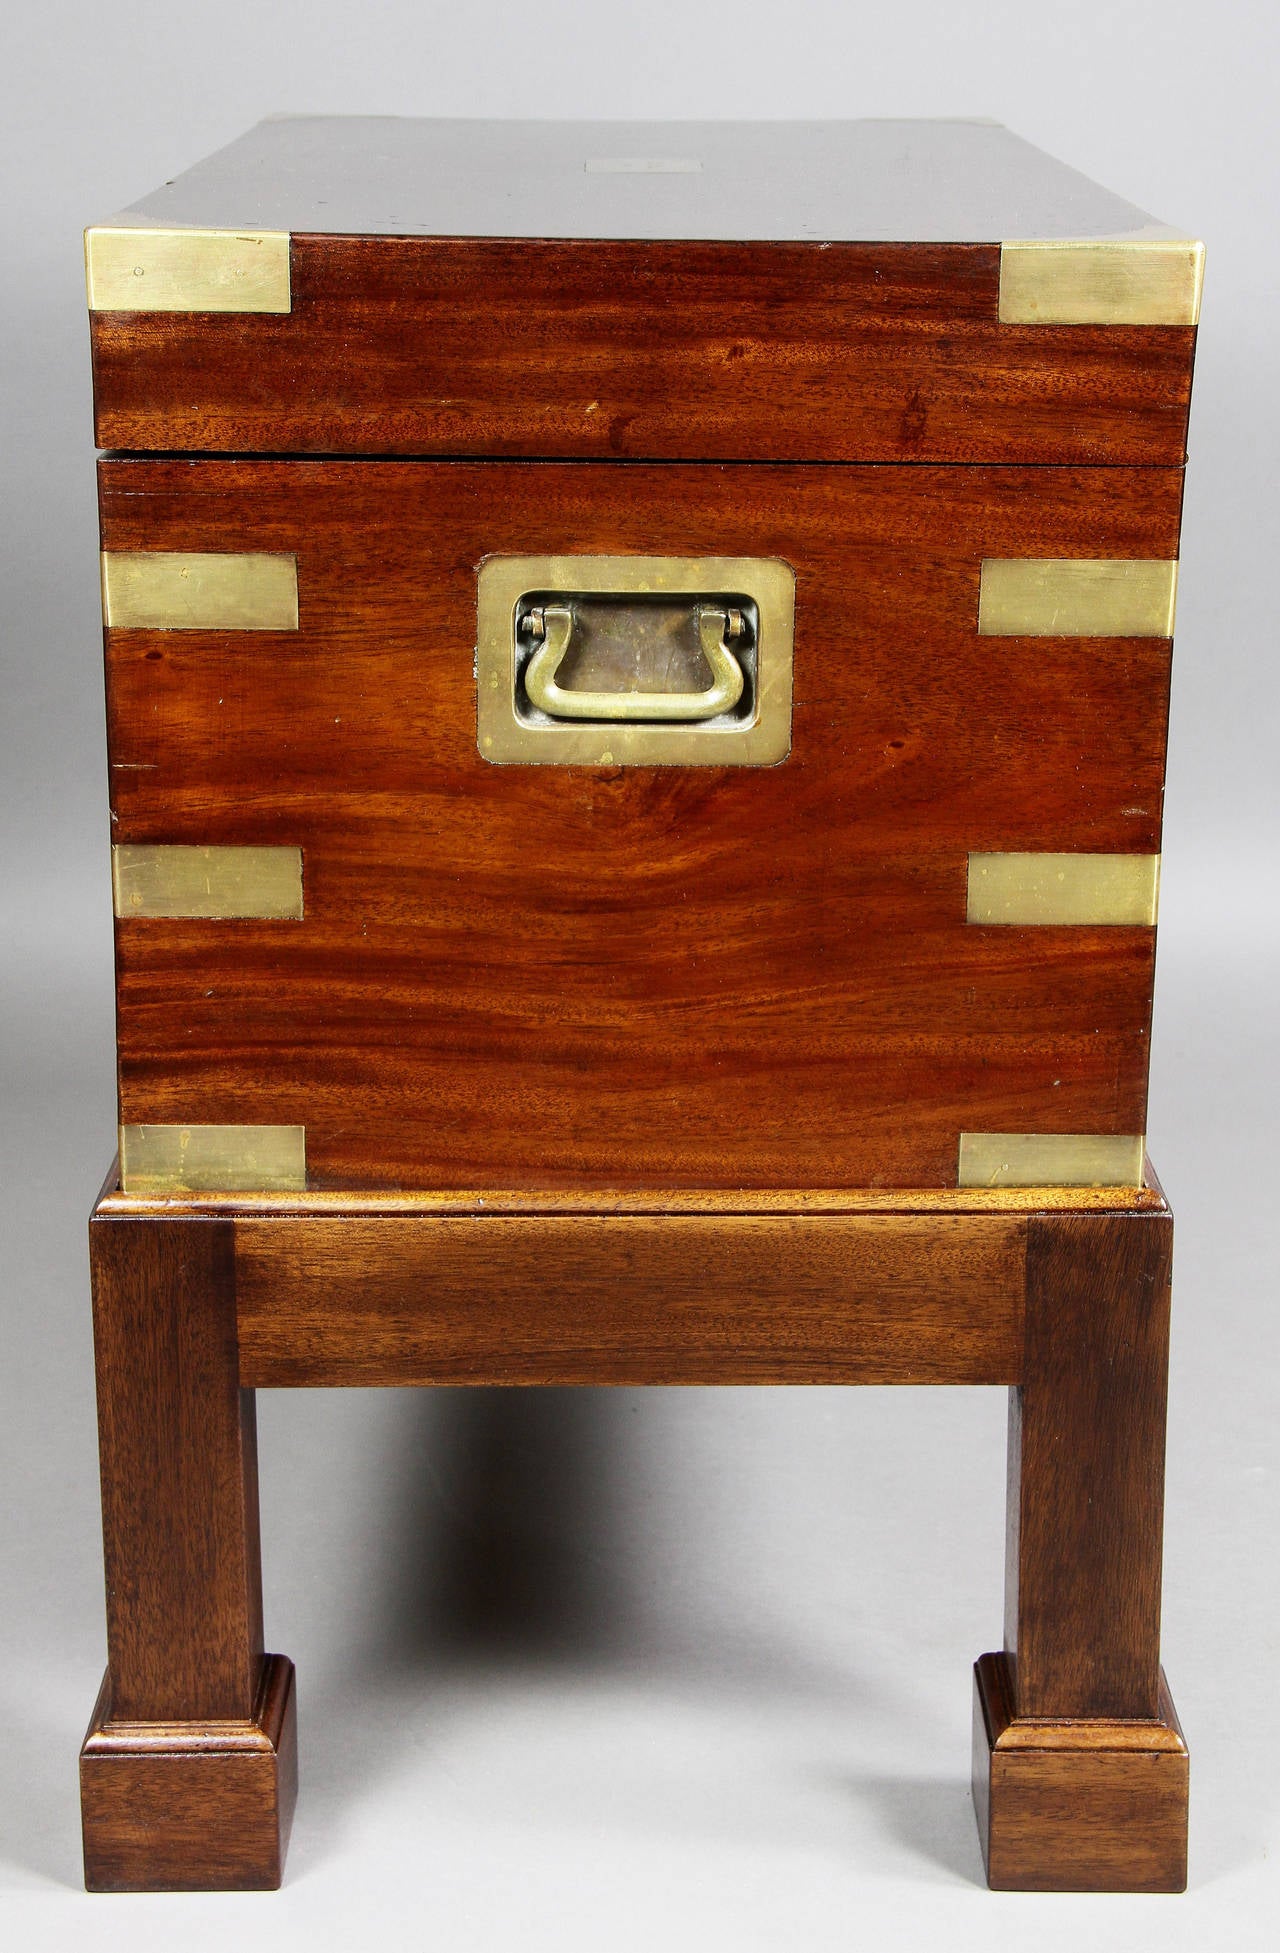 Unusually Large Benson and Hedges Mahogany and Brass Bound Humidor 3